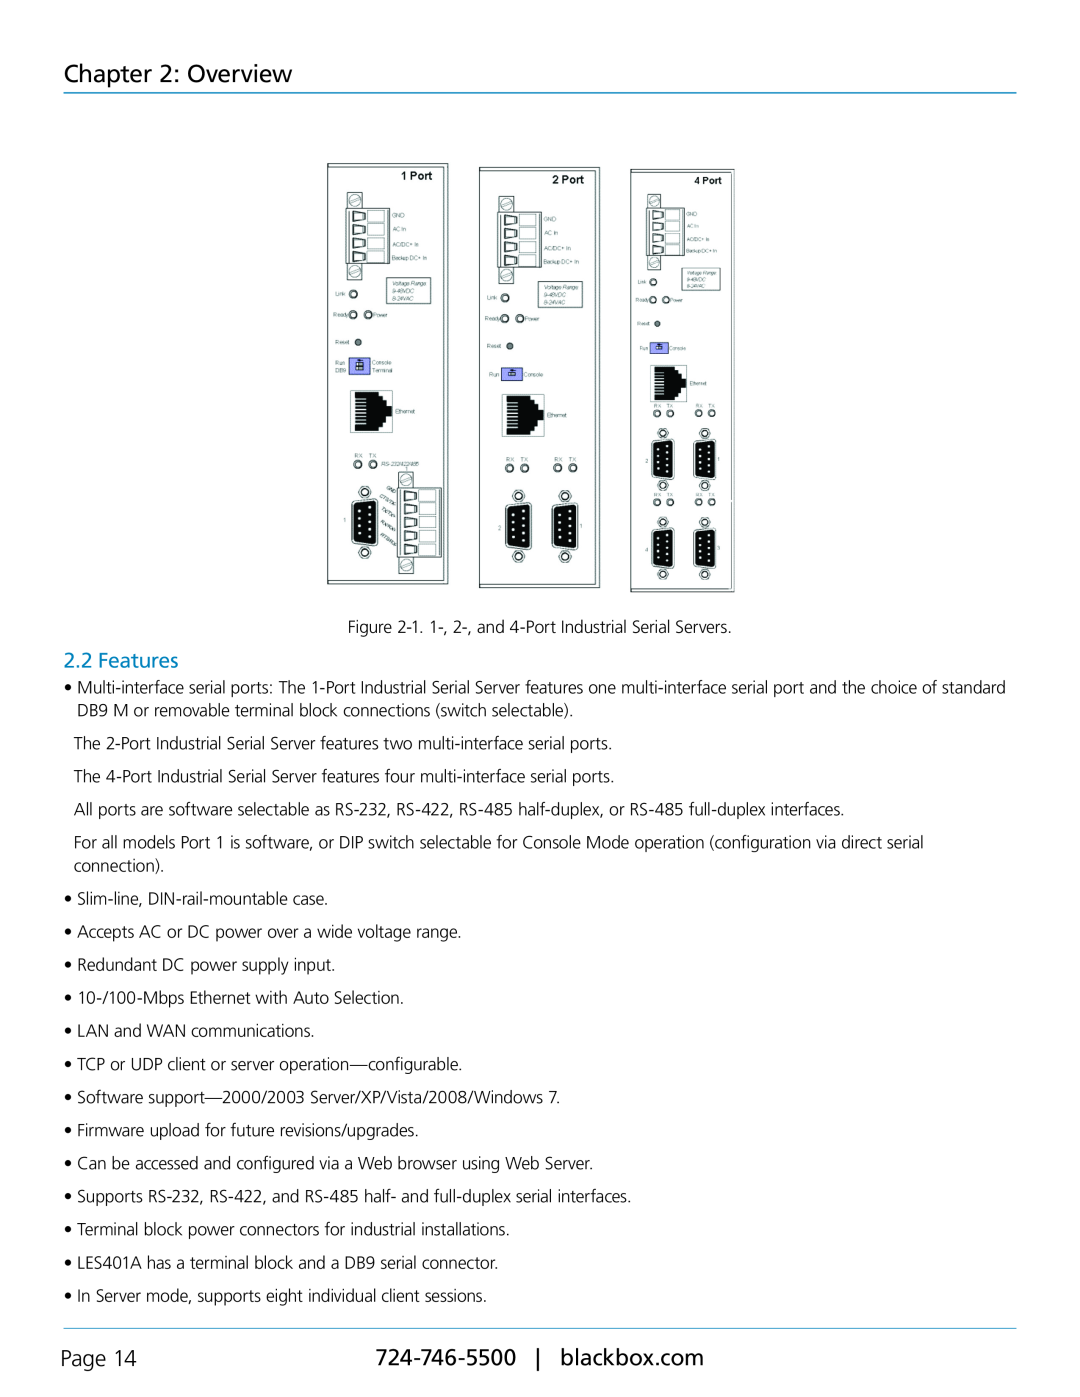 Black Box LES401A, LES402A, LES404A, 1-, 2-, and 4-Port Industrial Ethernet Serial Servers manual Features, Overview, Page 